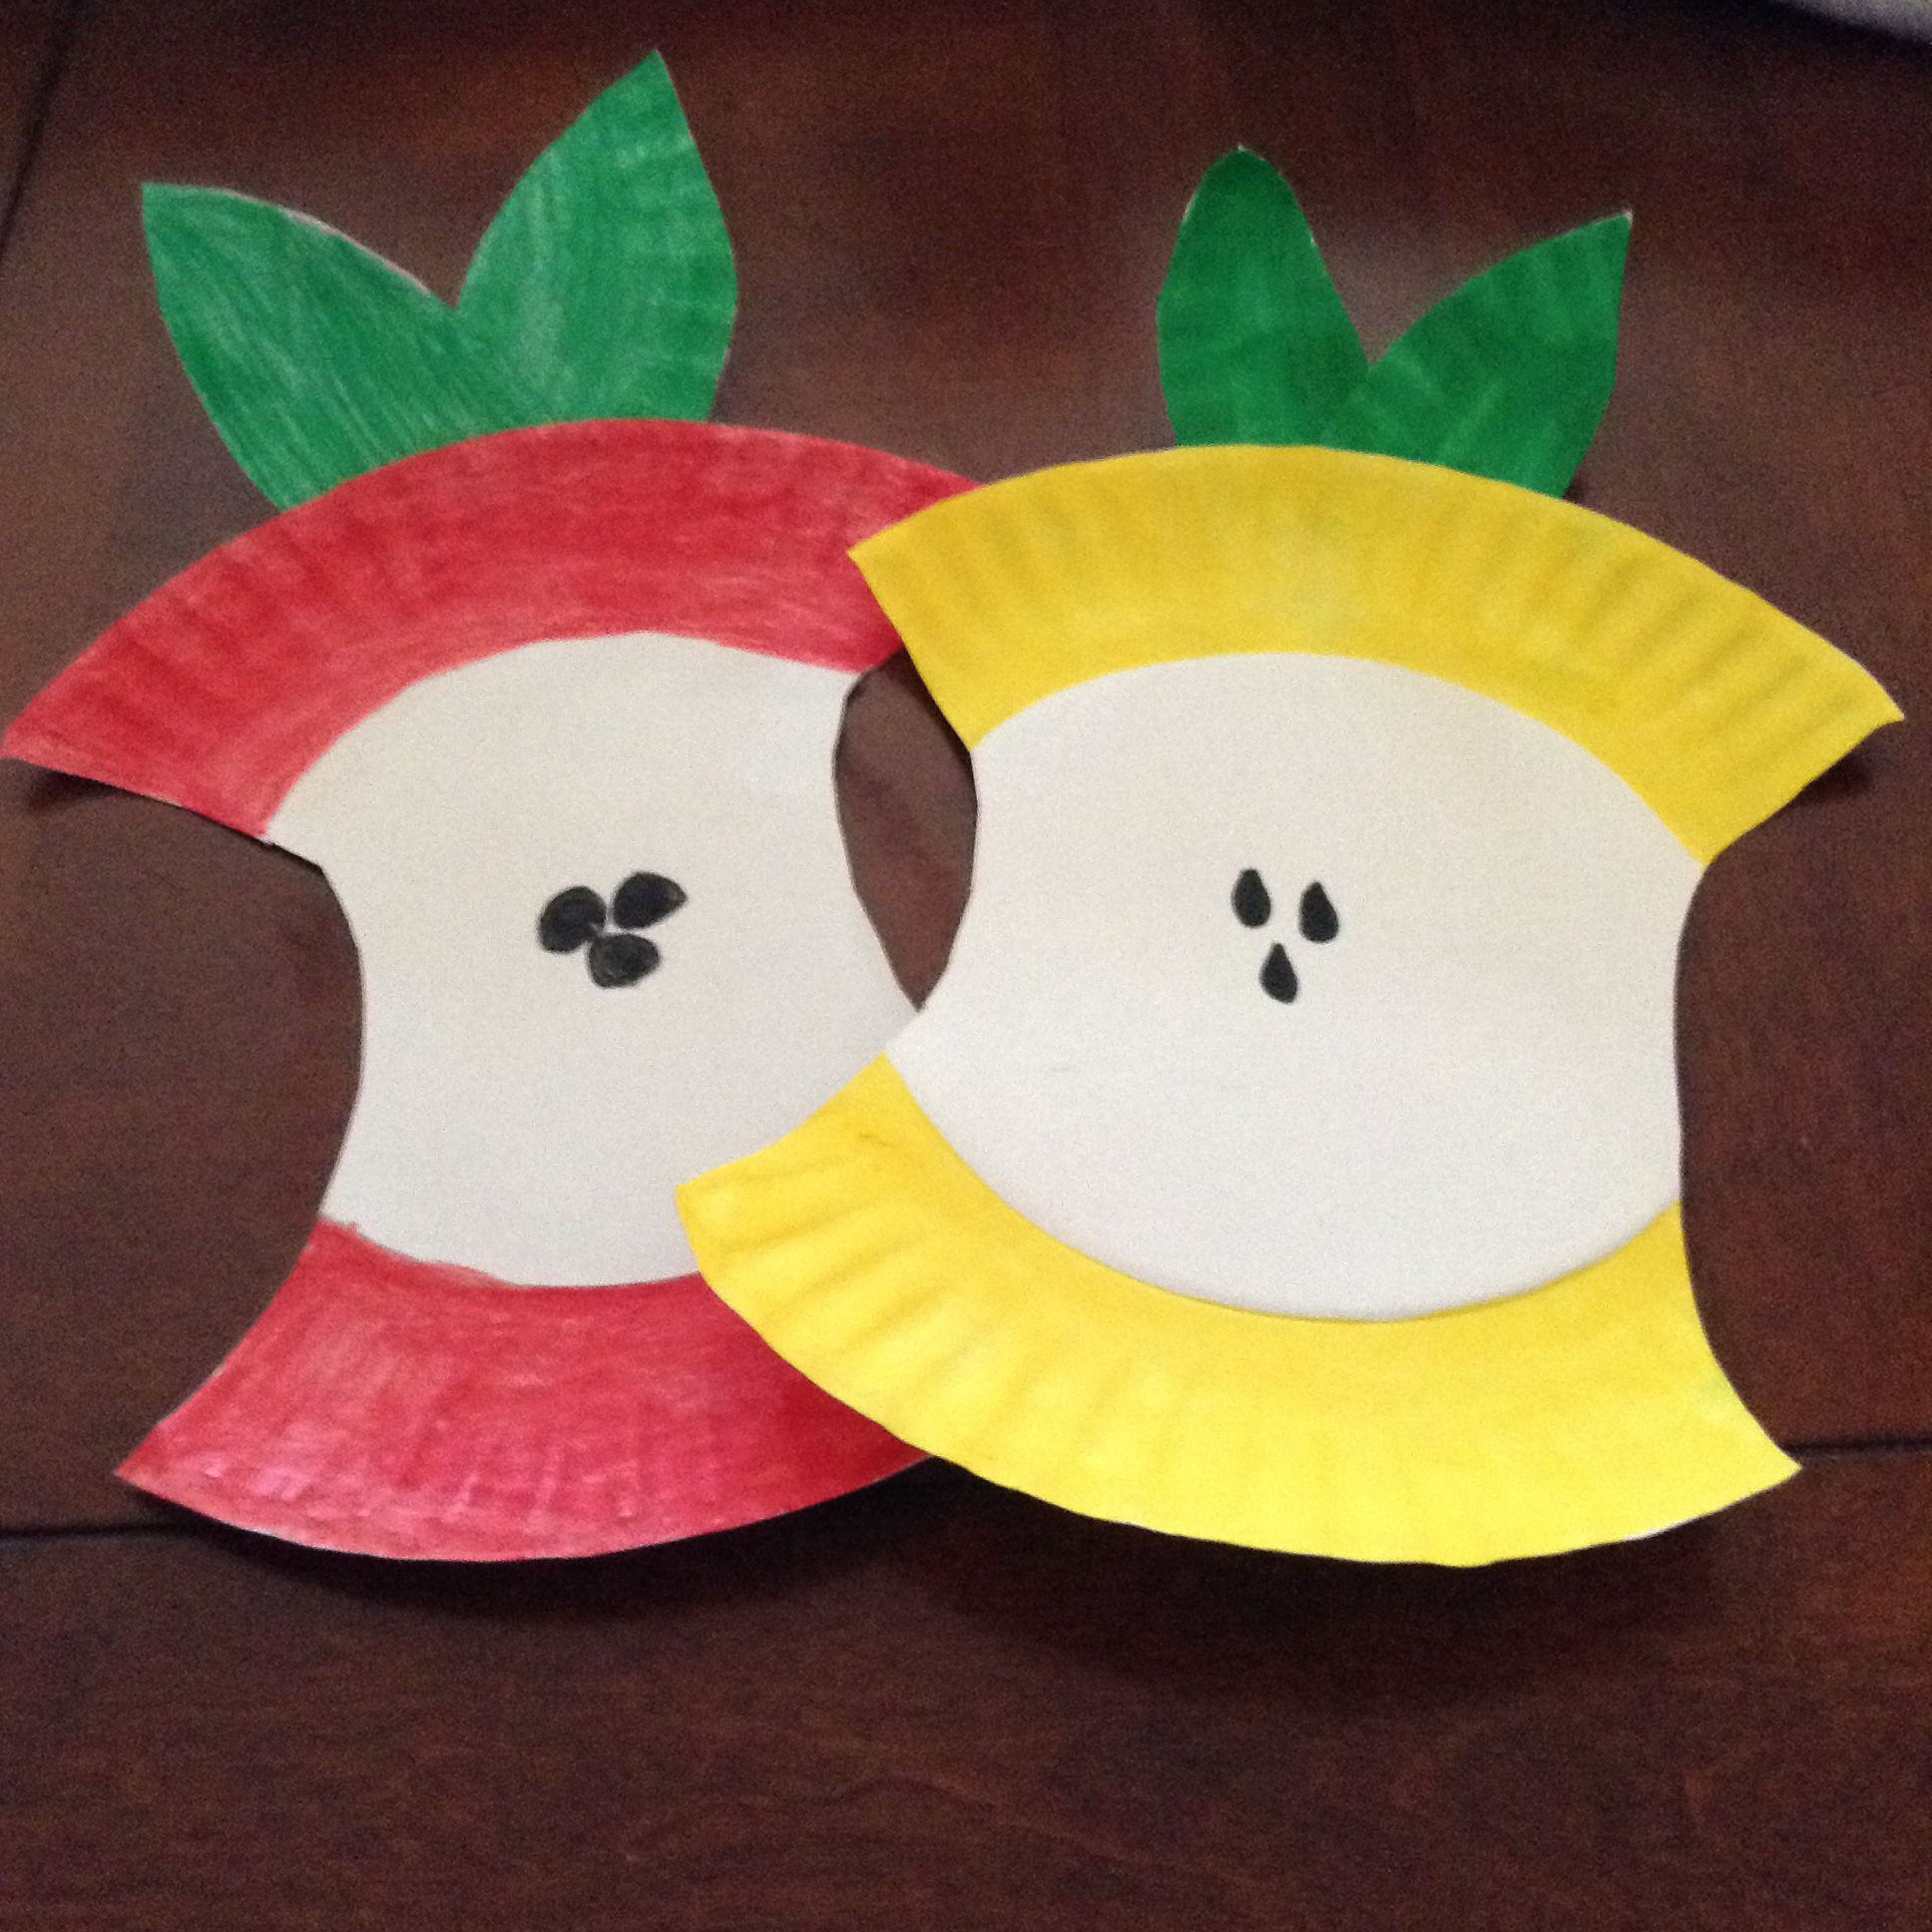 Fruit Of The Spirit Crafts For Preschoolers
 Apples we made for lesson on the fruits of the Spirit